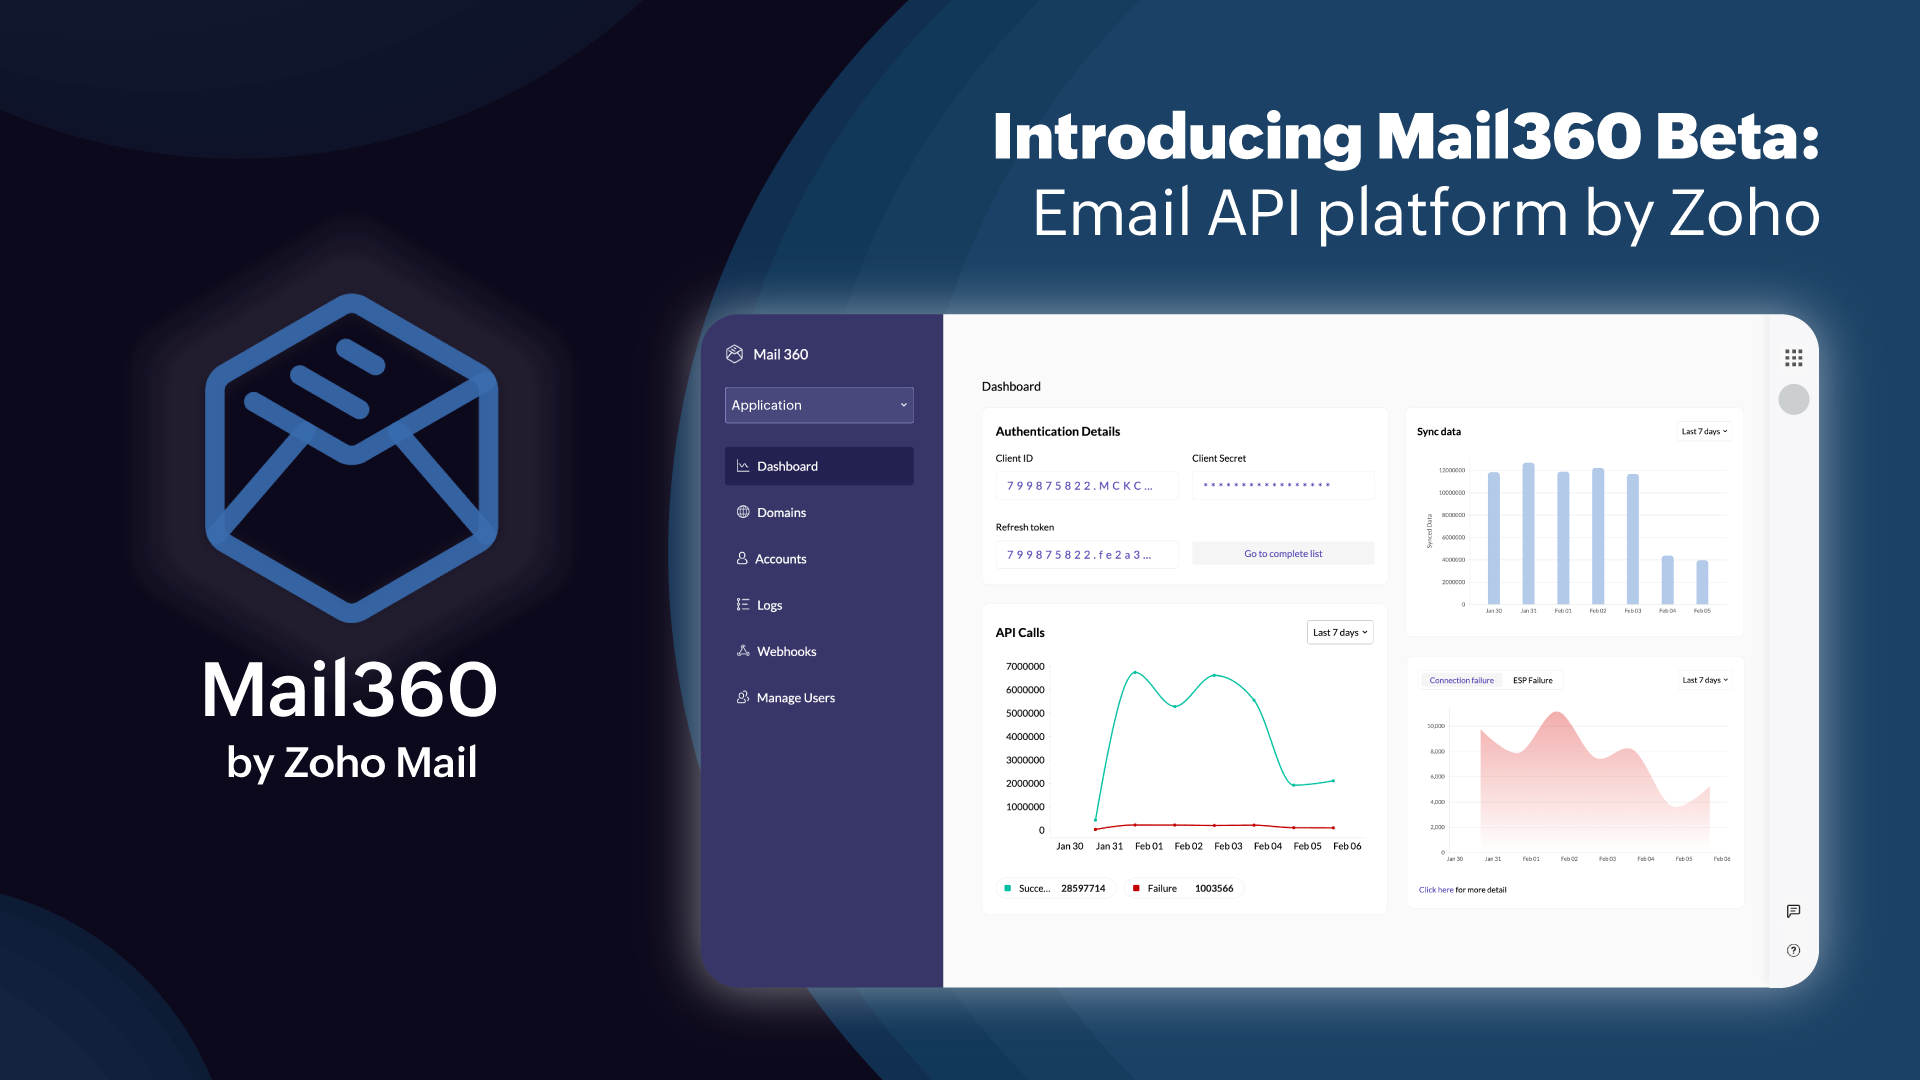 Announcing Zoho Mail360 Beta: Full email capability for your application